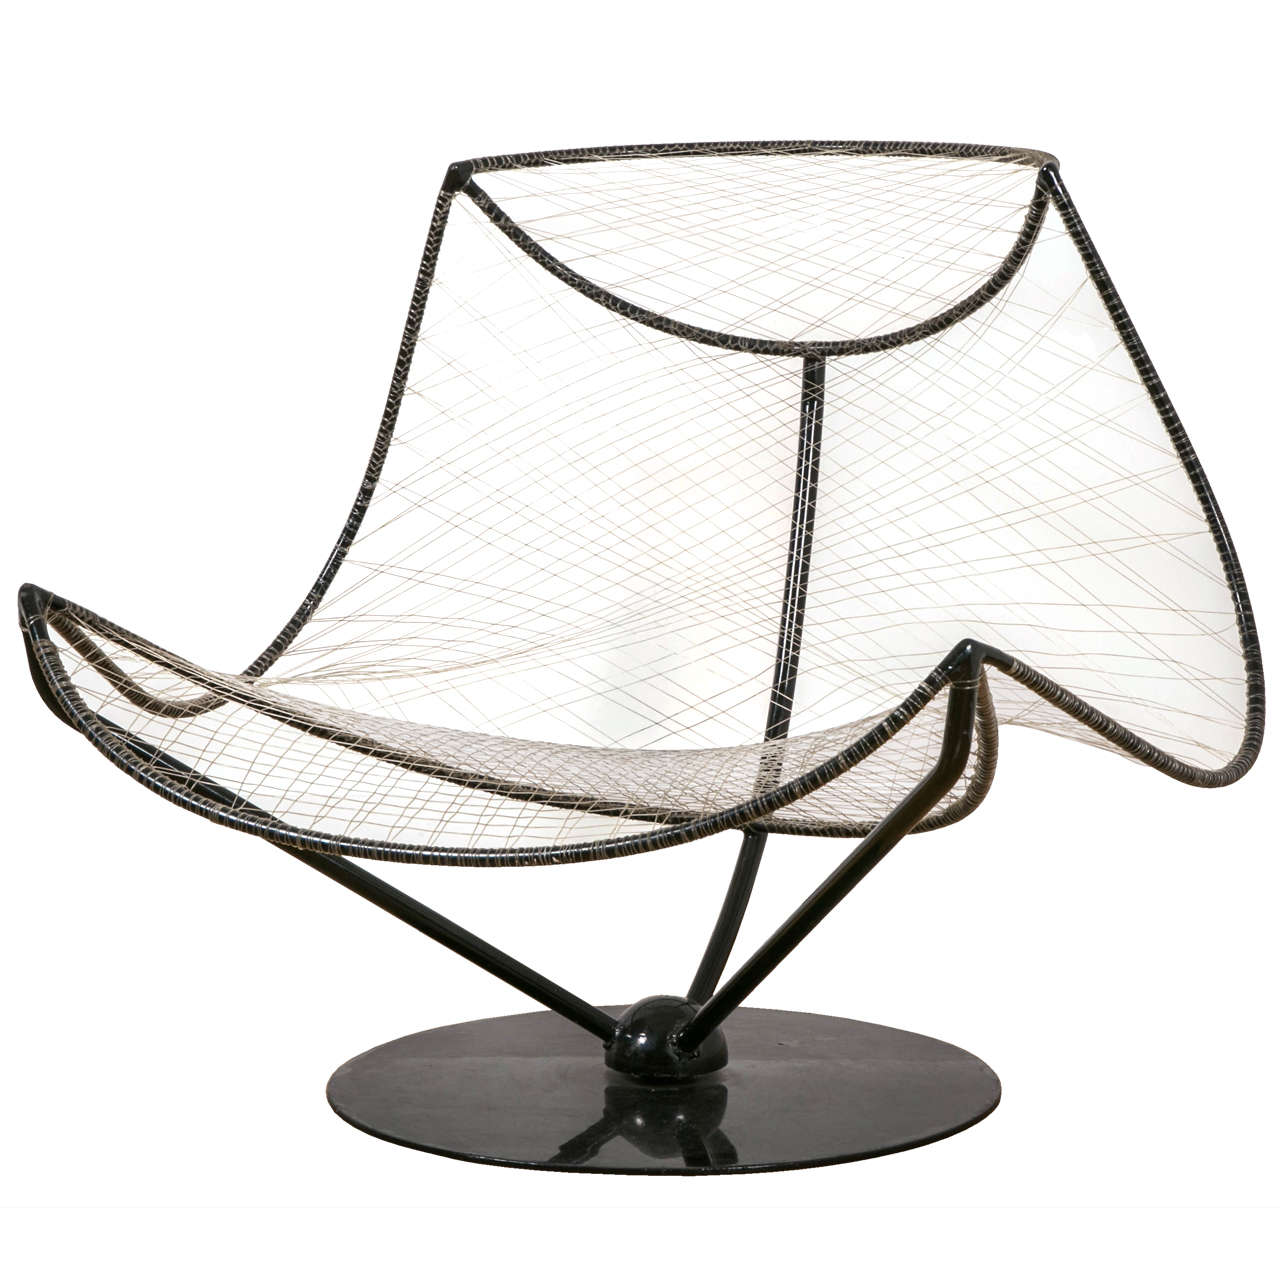 String Chair by Conti Forlani and Grassi for Paoli, Designed in 1962